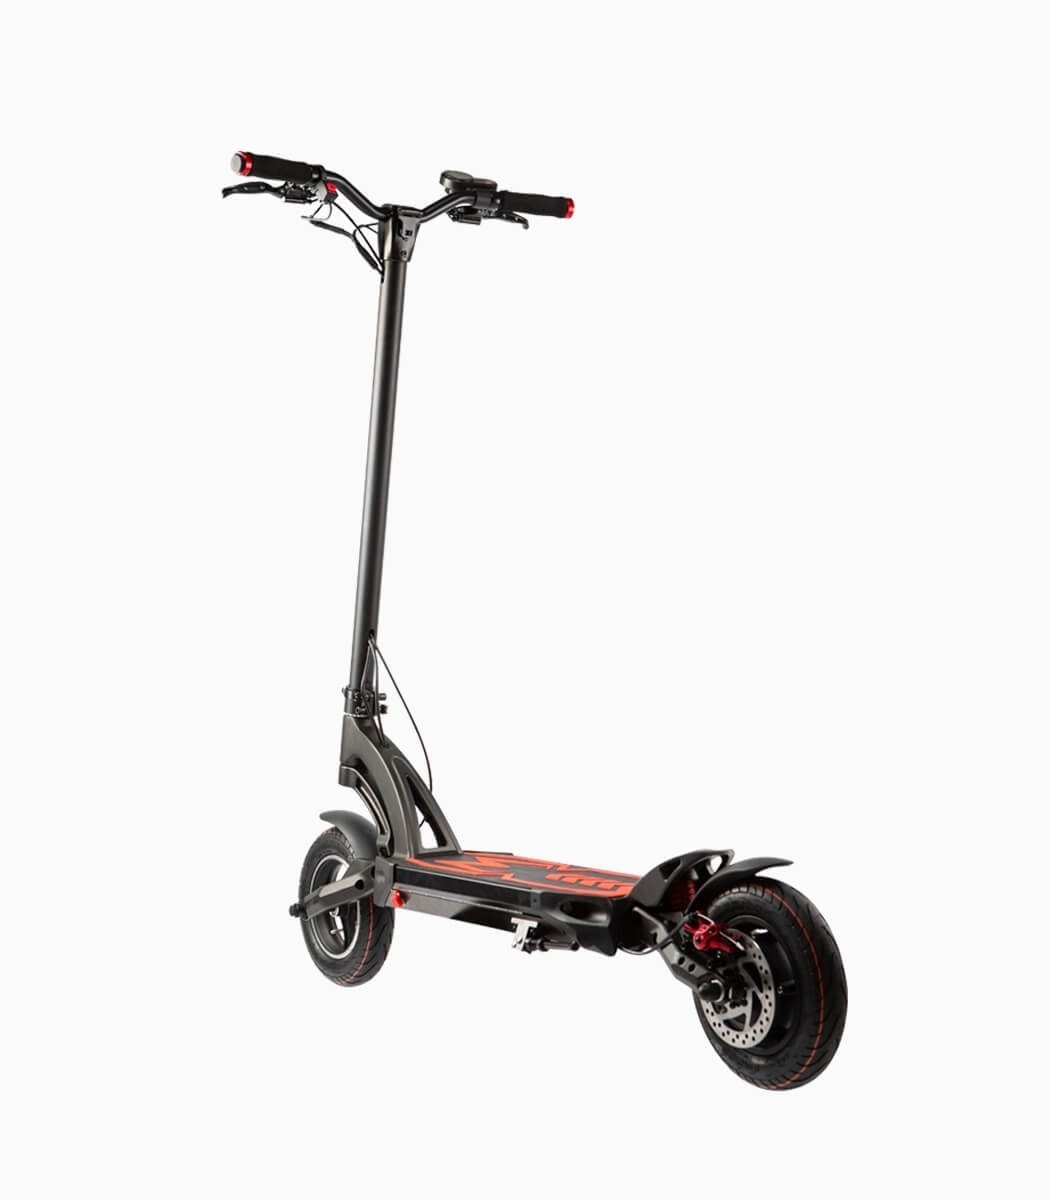 MOBOT MANTIS (RED10AH) UL2272 certified high performance electric scooter rear angled left